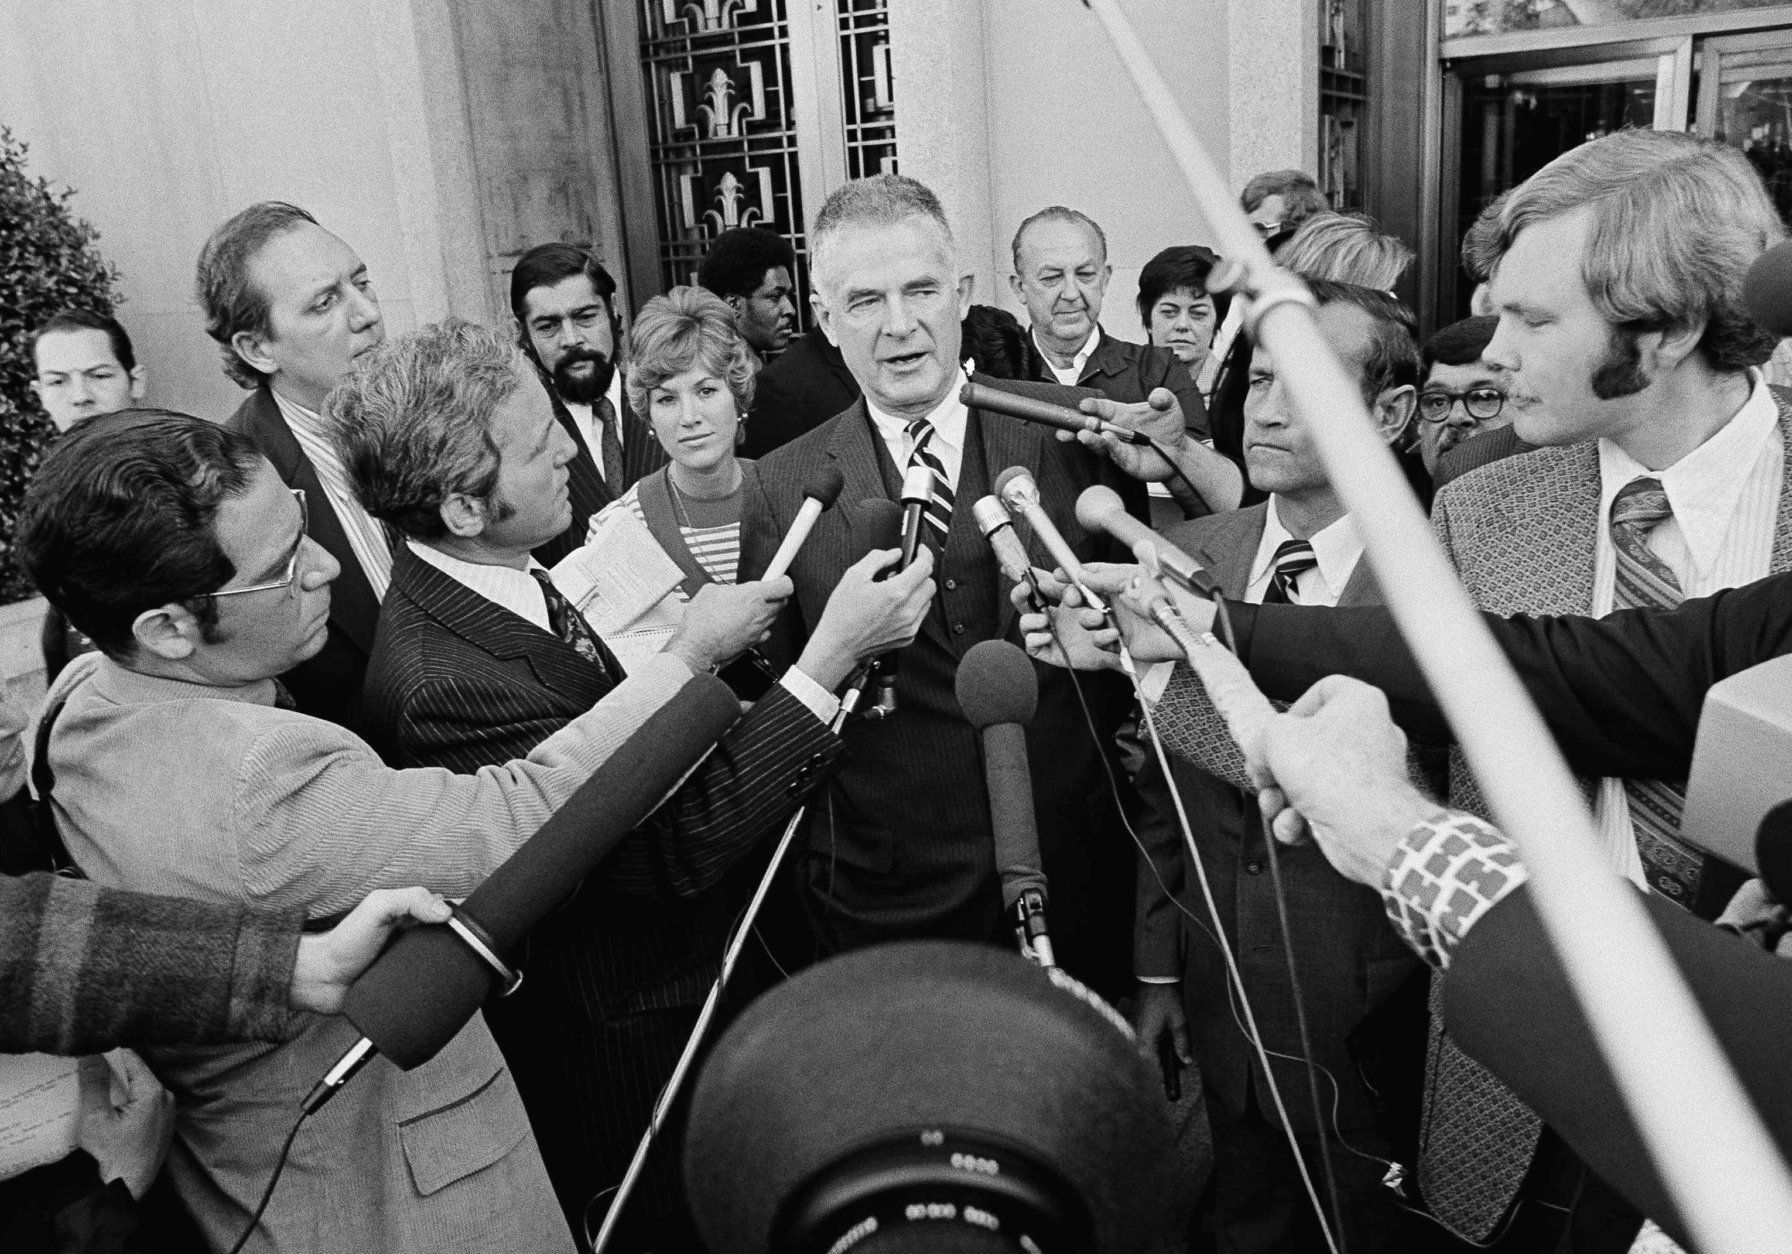 <p>In 1974, former White House counsel John W. Dean III was sentenced to one to four years in prison for obstruction of justice in the Watergate cover-up. (Dean ended up serving four months.)</p>
<p>Special Watergate prosecutor Archibald Cox is surrounded by newsmen outside D.C. District Court in Washington on Friday, Oct. 19, 1973, after ousted White House counsel John W. Dean III pleaded guilty to conspiring to obstruct the Watergate investigation. Cox said he further charges would be brought with the exception of perjury if Dean&#8217;s testimony proves false. (AP Photo)</p>
